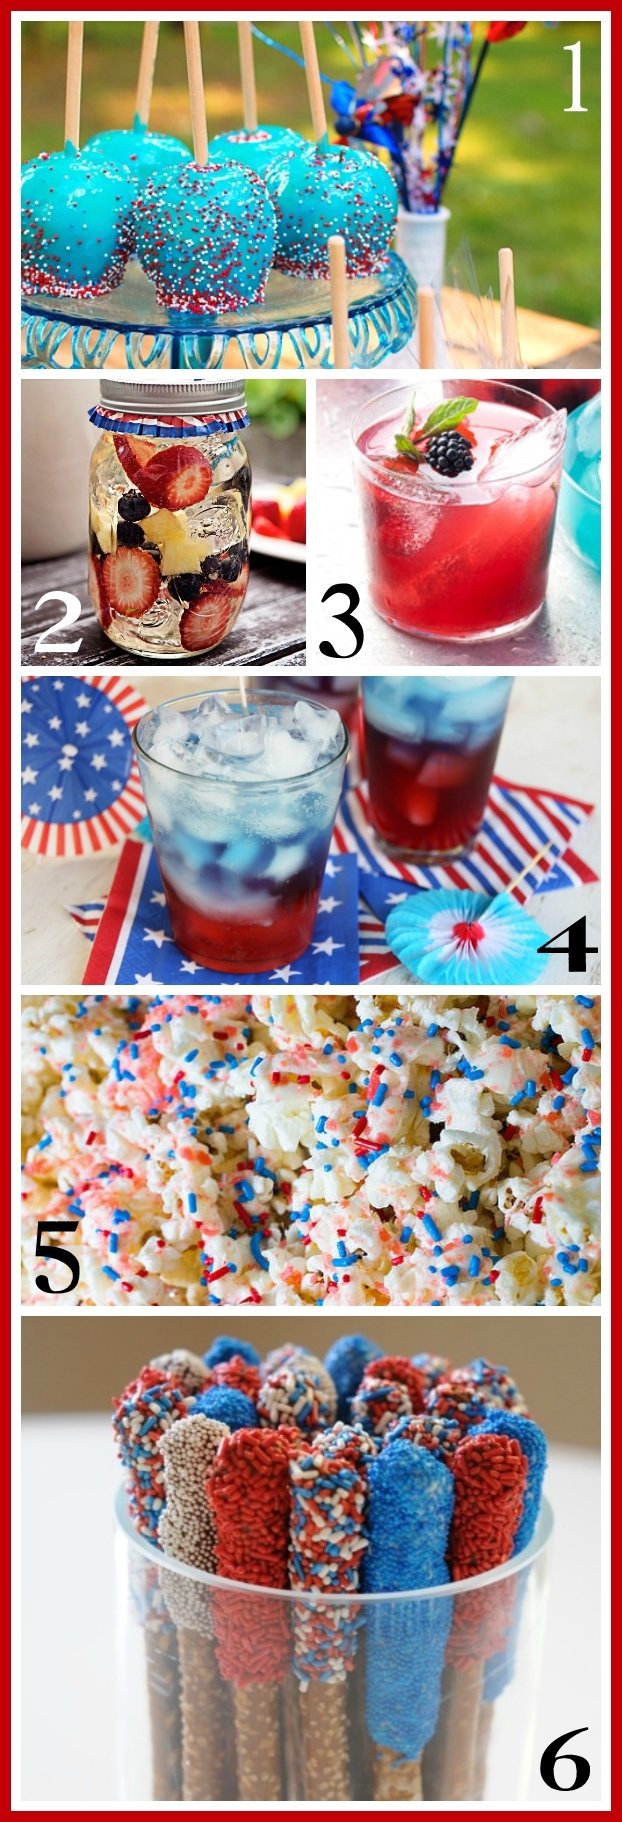 10 Most Popular 4Th Of July Party Ideas last minute 4th of july party ideas ask anna 1 2022